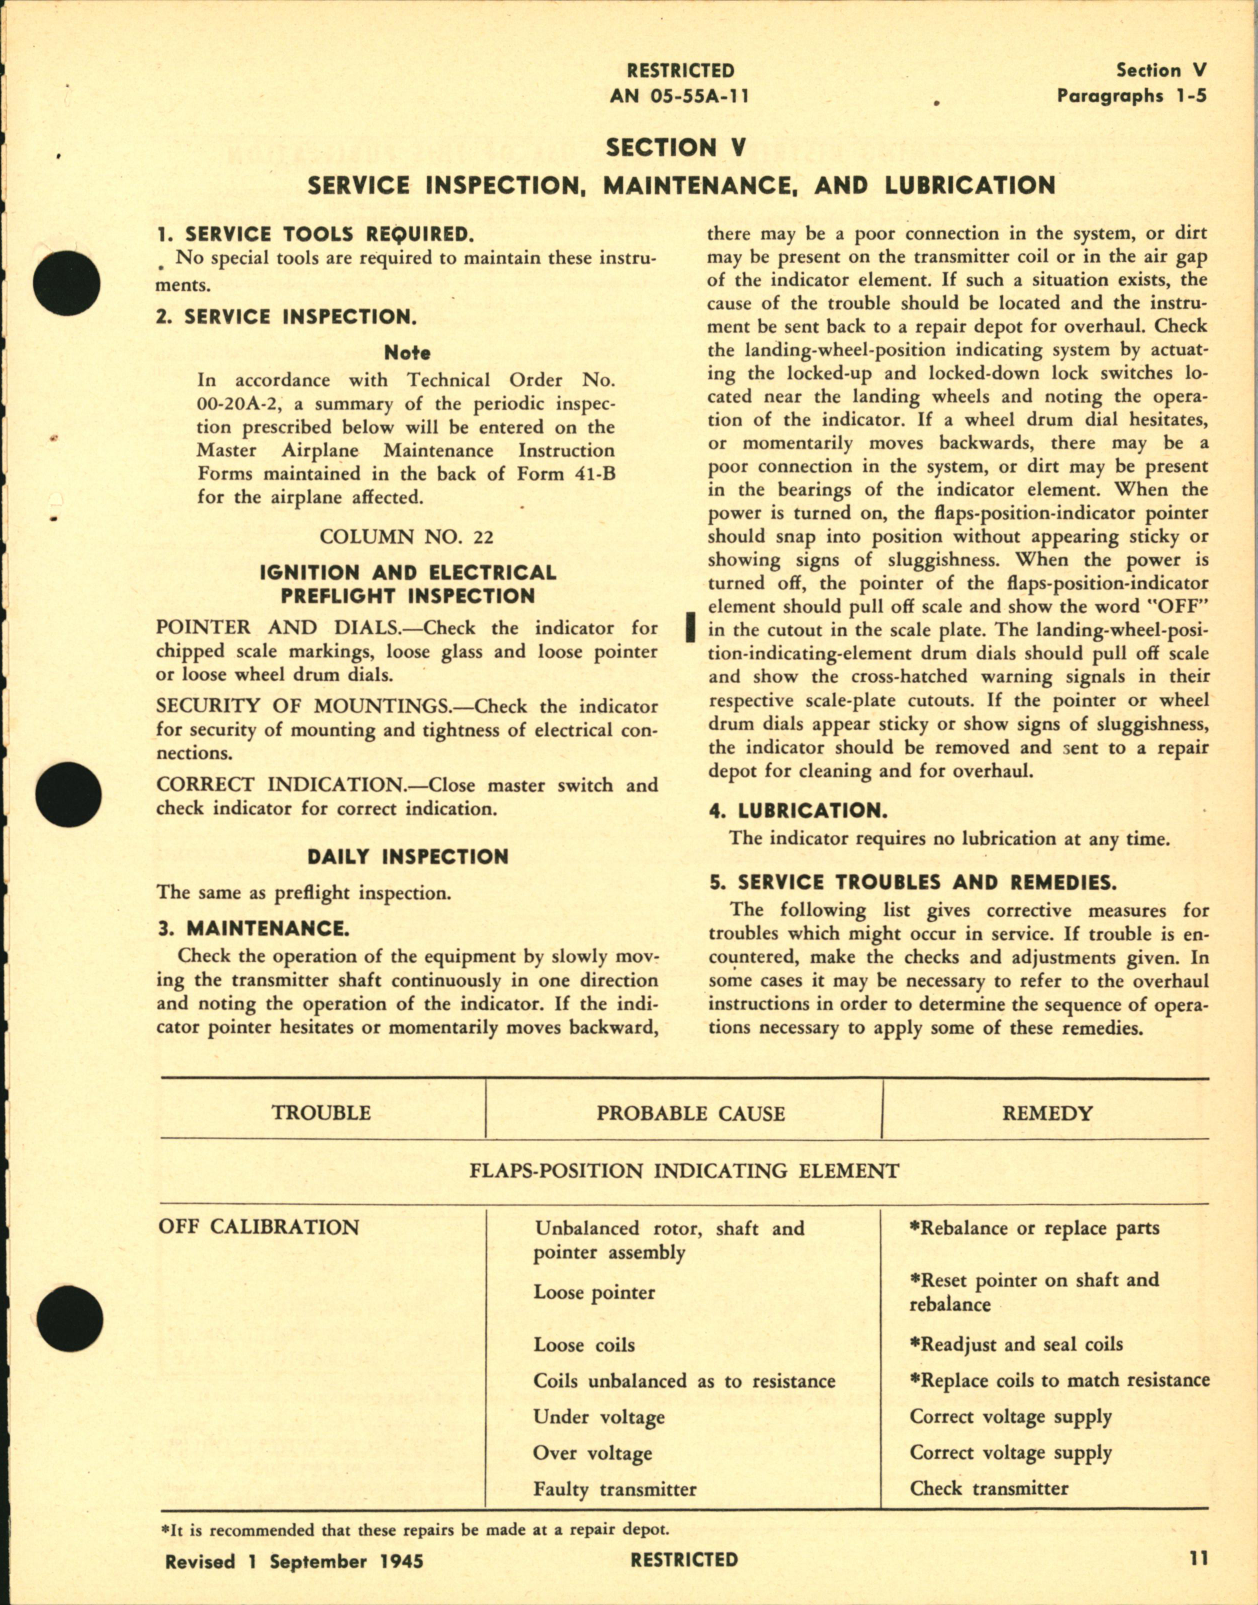 Sample page 5 from AirCorps Library document: Operation, Service, & Overhaul Instructions with Parts Catalog for Landing-Wheels and Flaps Position Indicators